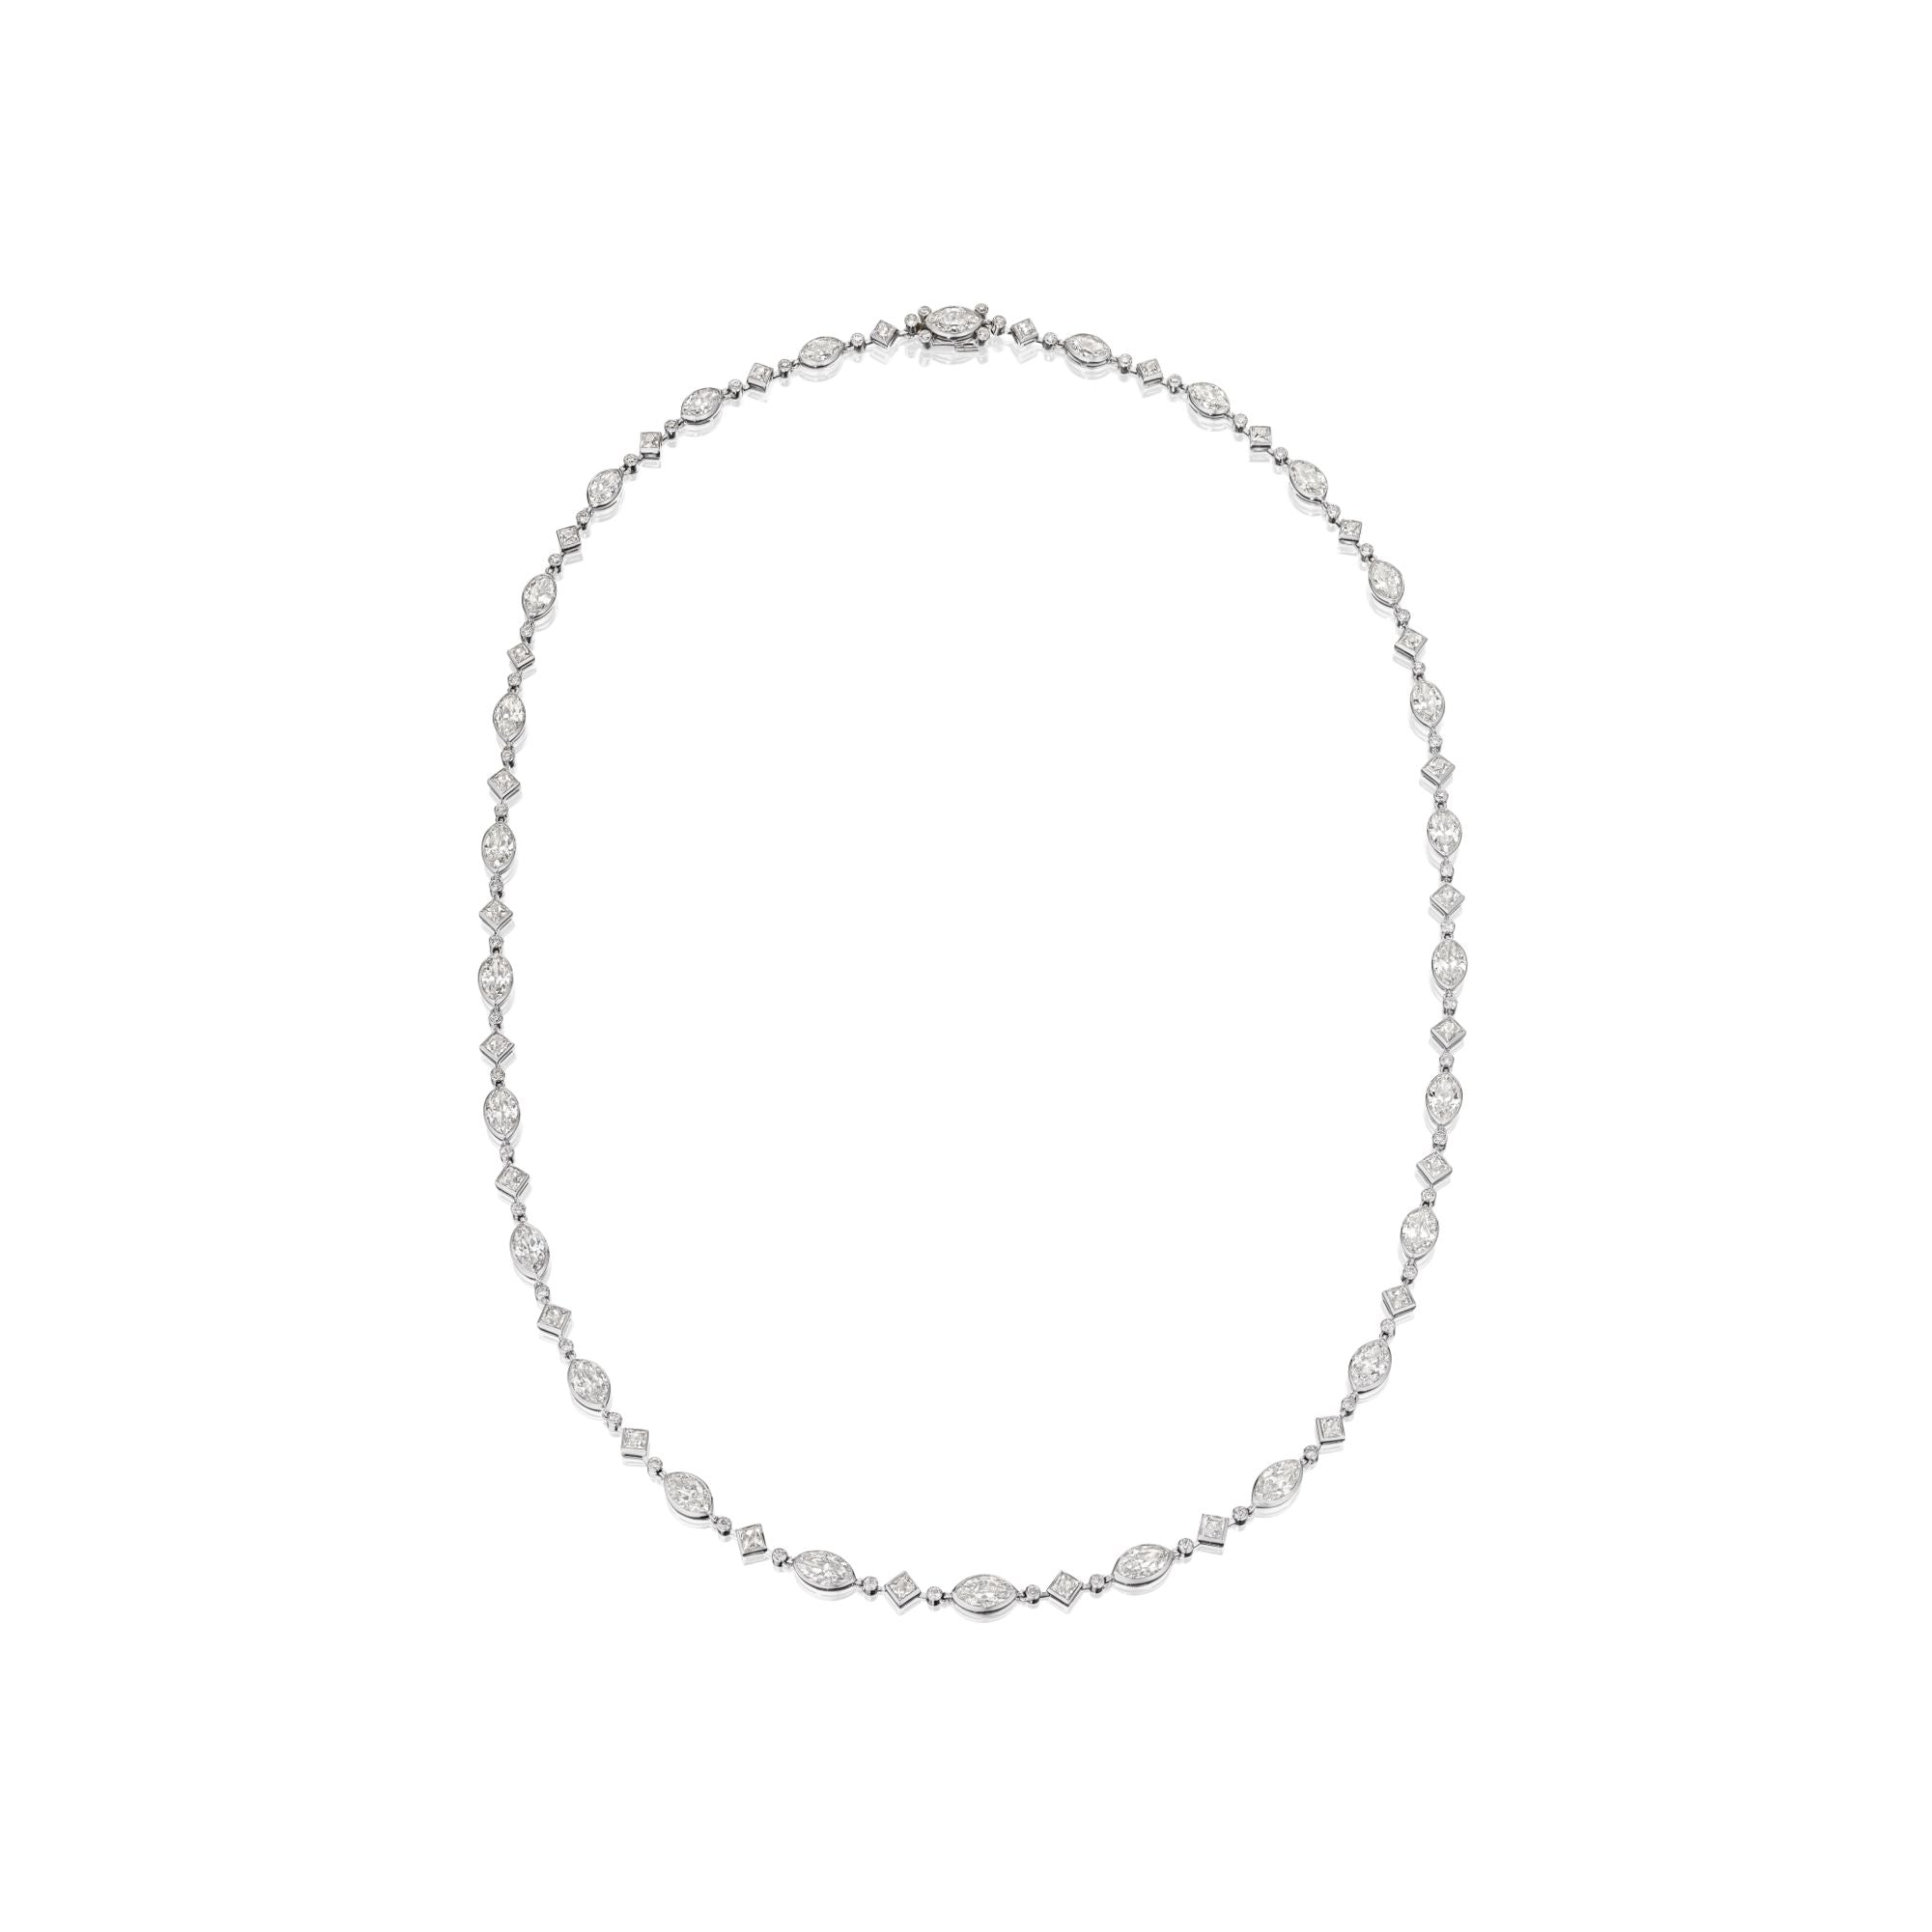 DIAMOND NECKLACE BY SIEGELSON, NEW YORK